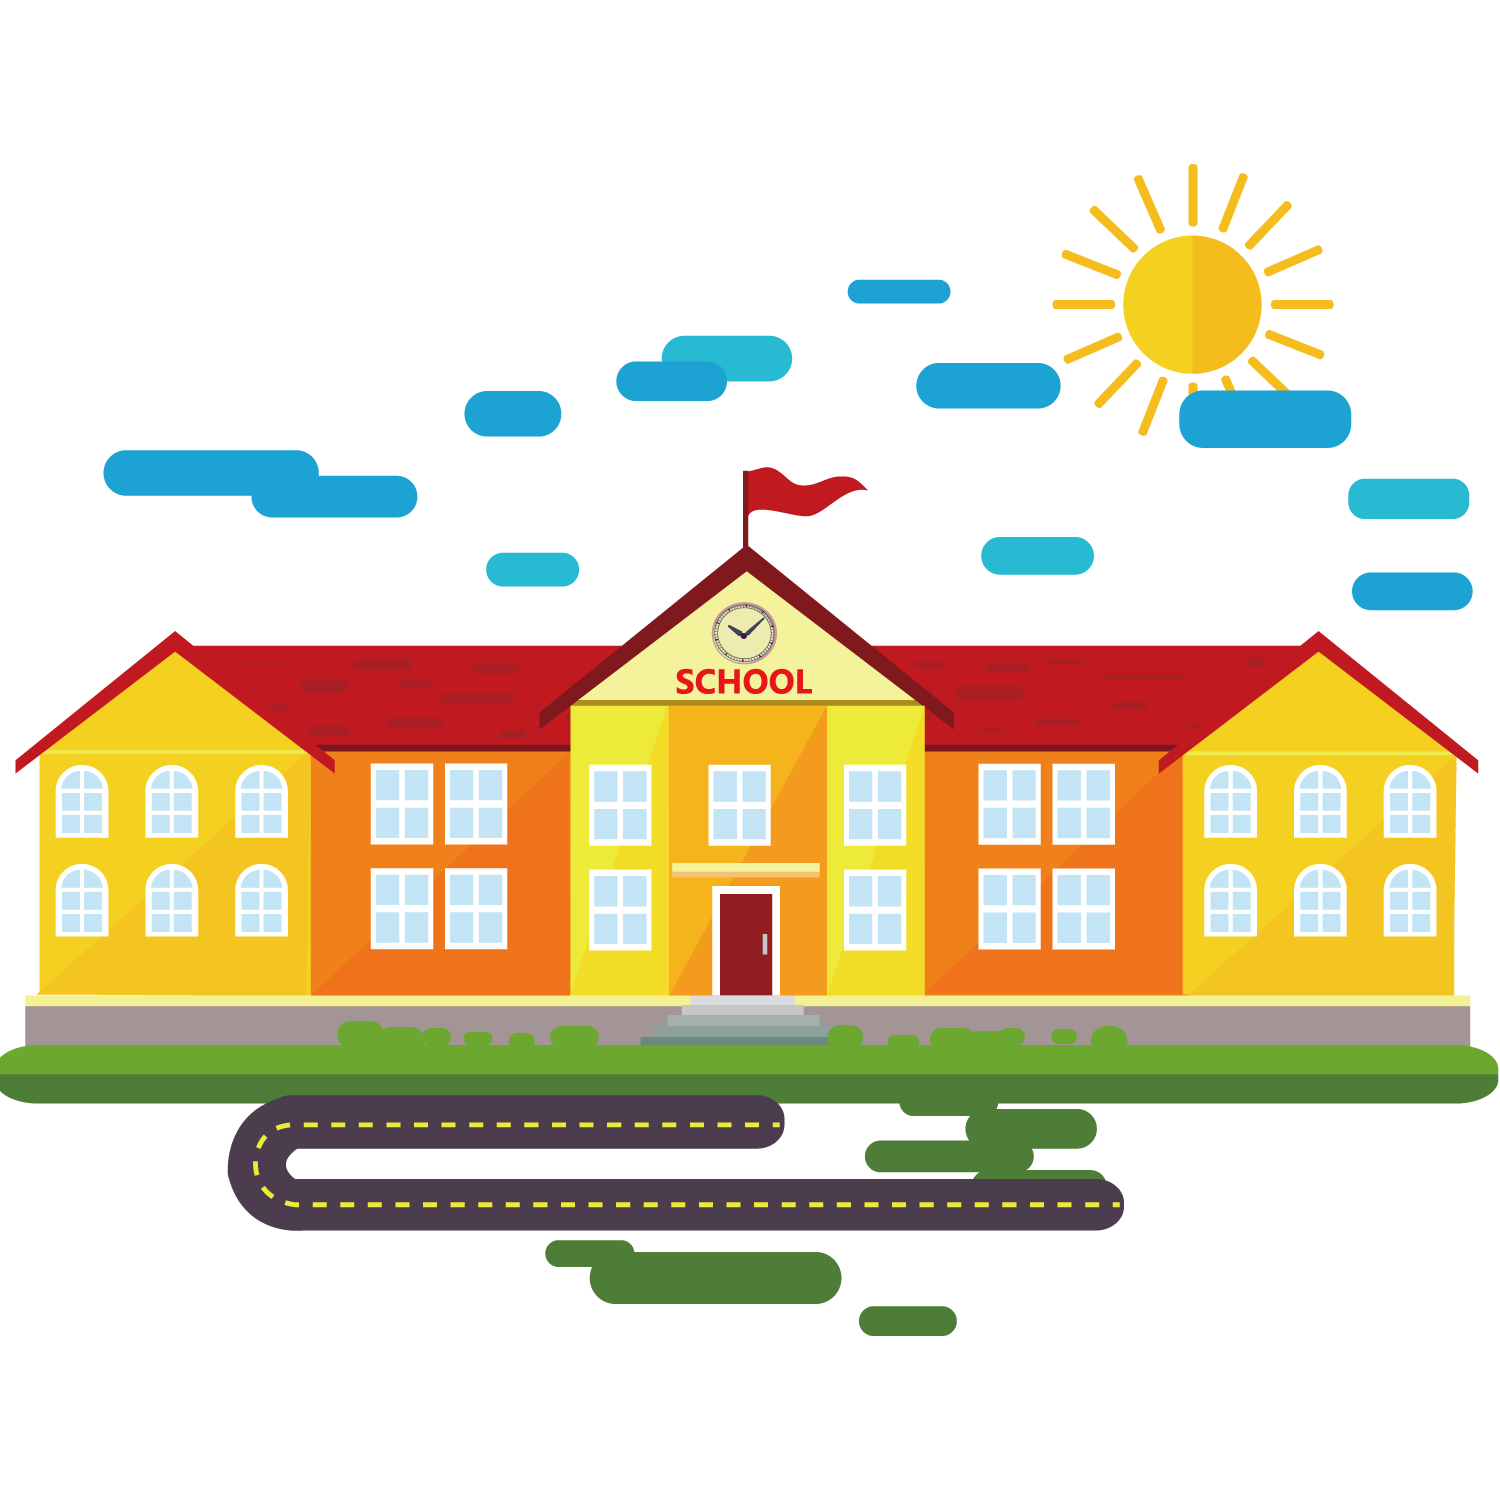 0 Result Images of School Building Cartoon Png - PNG Image Collection